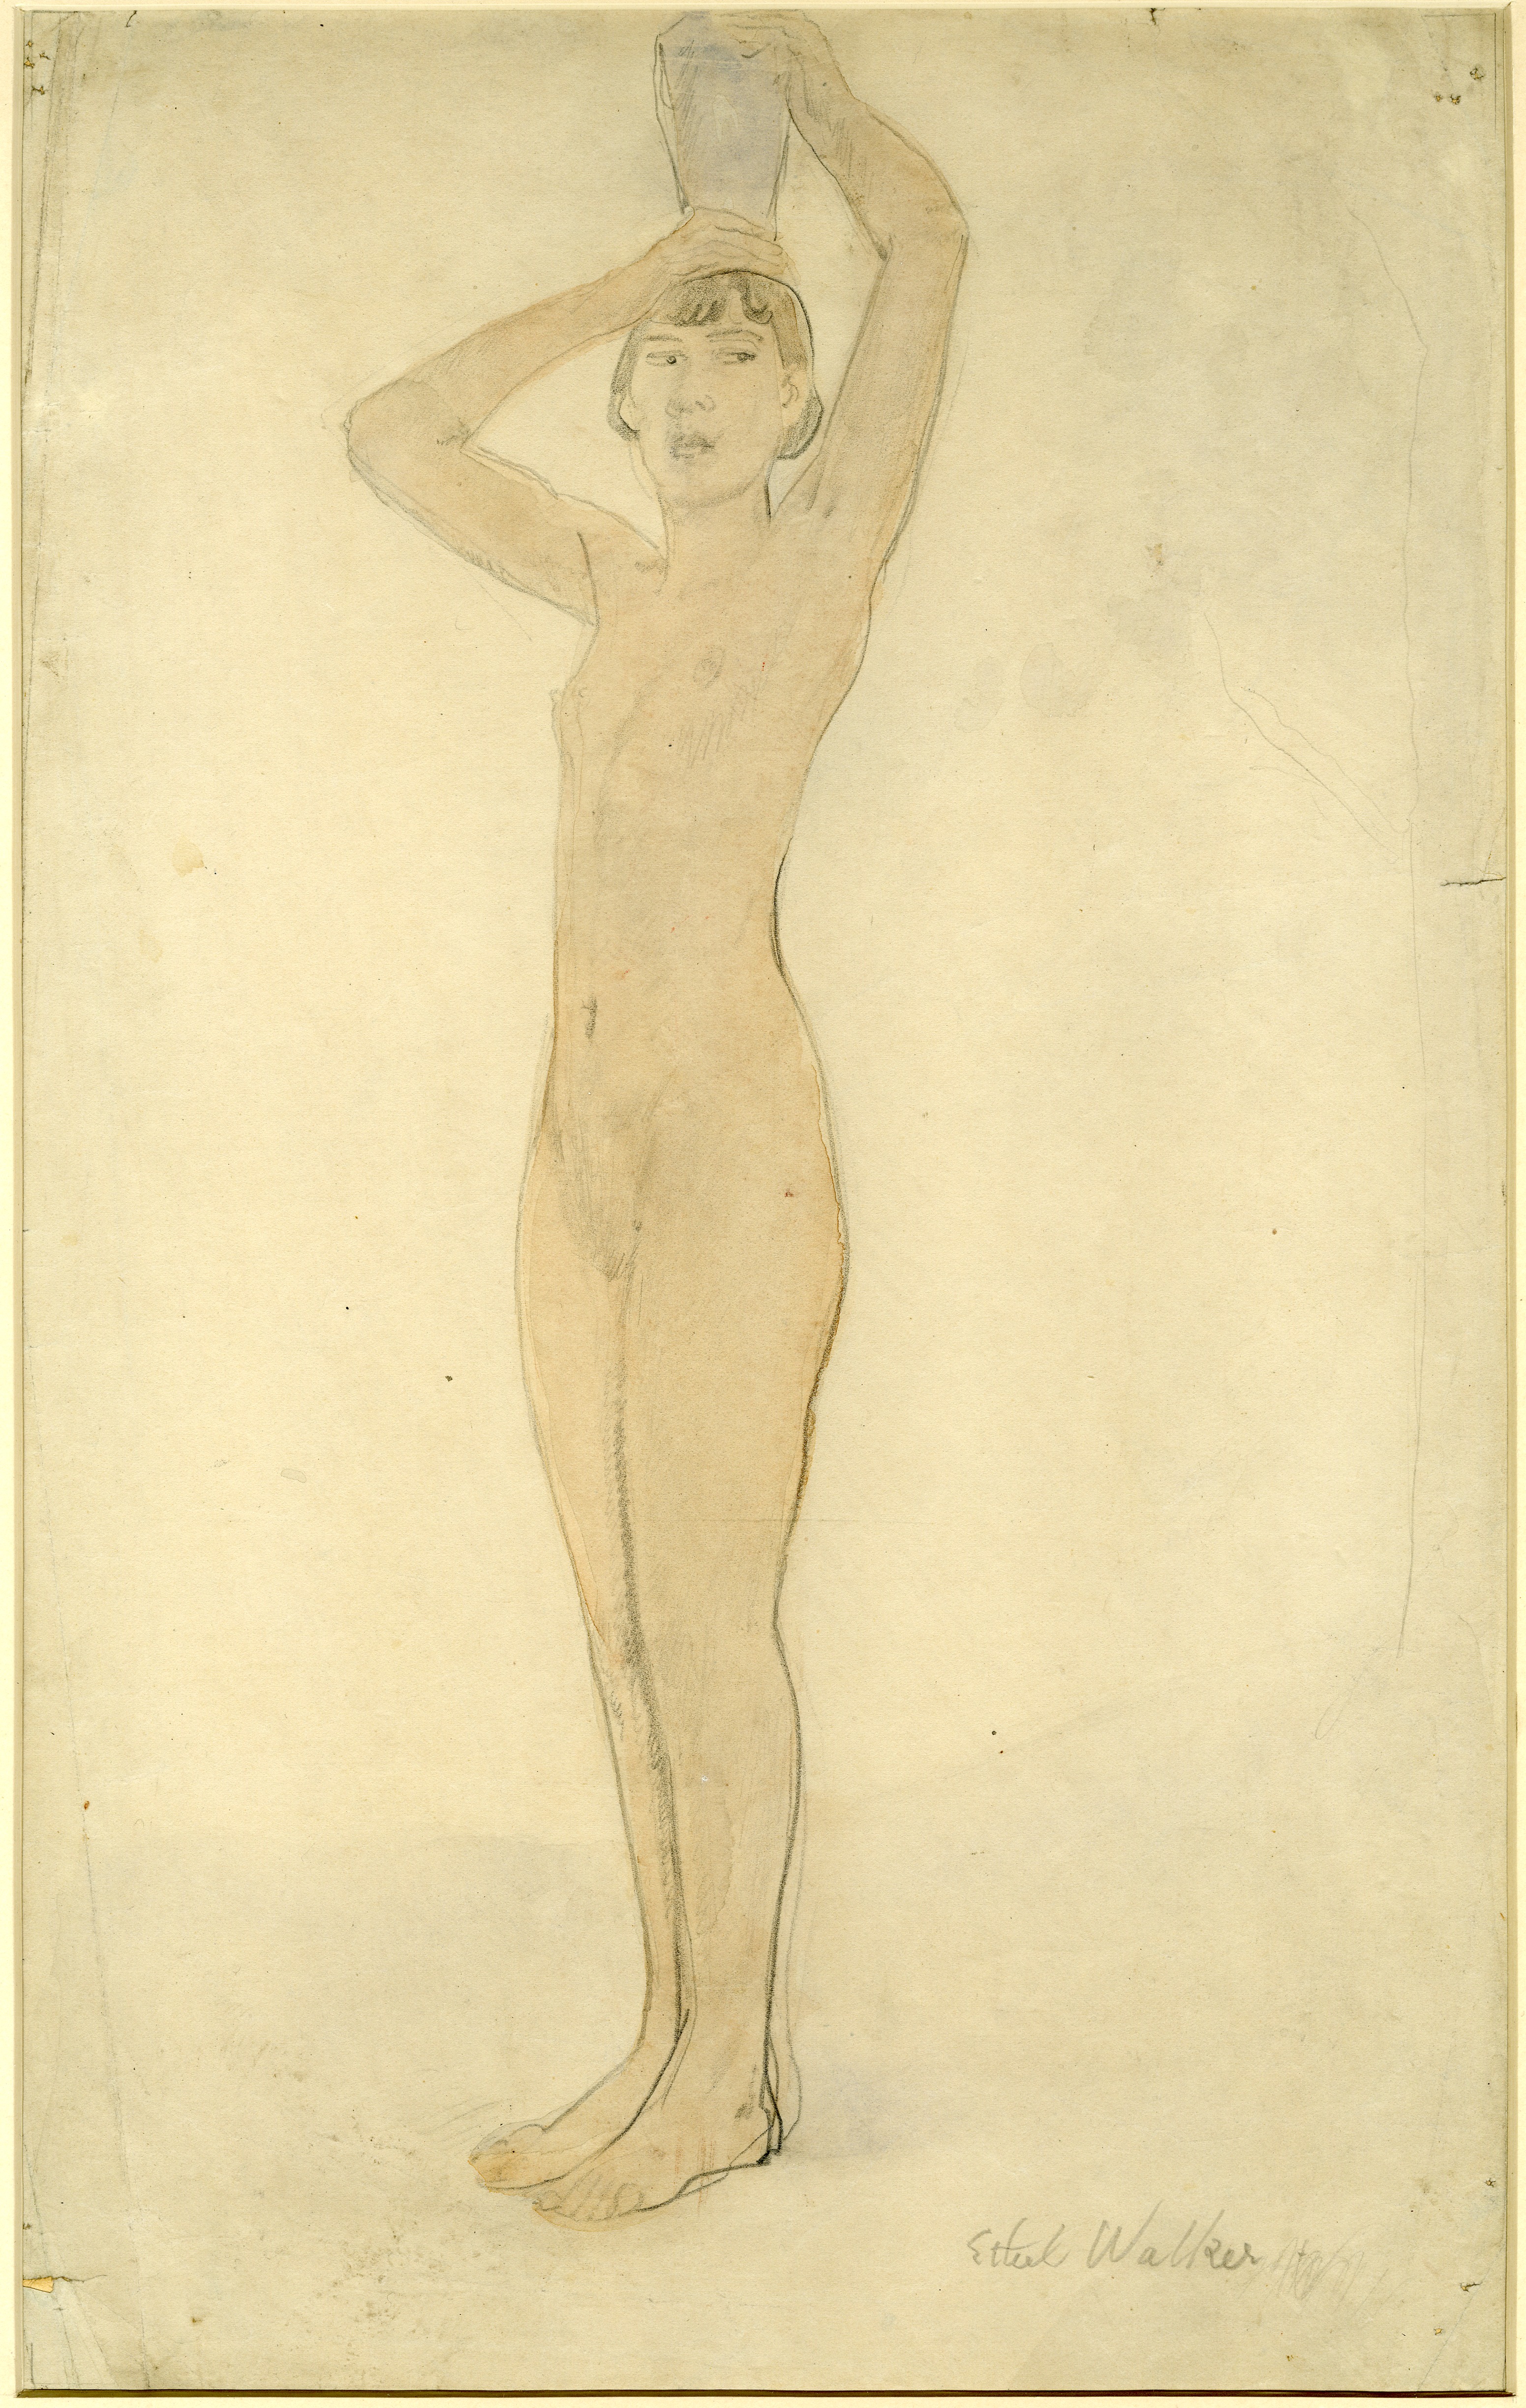 Female nude study (before 1937)